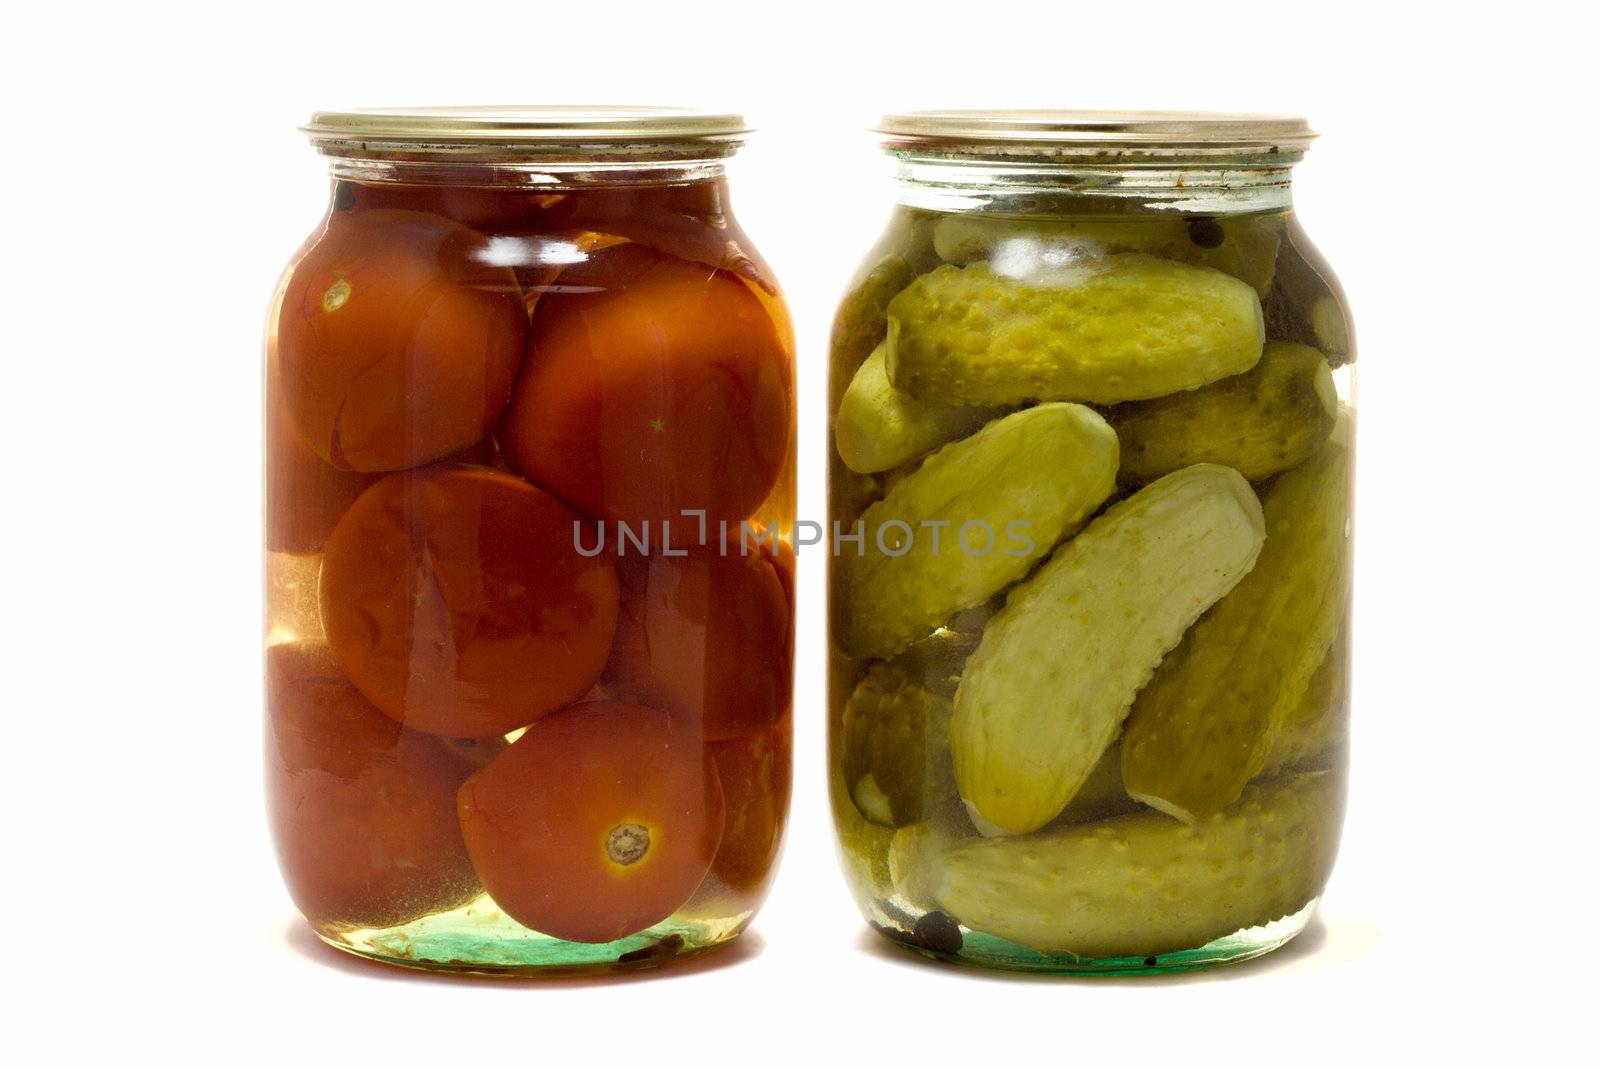 two glass jars with preserved tomatoes and cucumbers, isolated on white